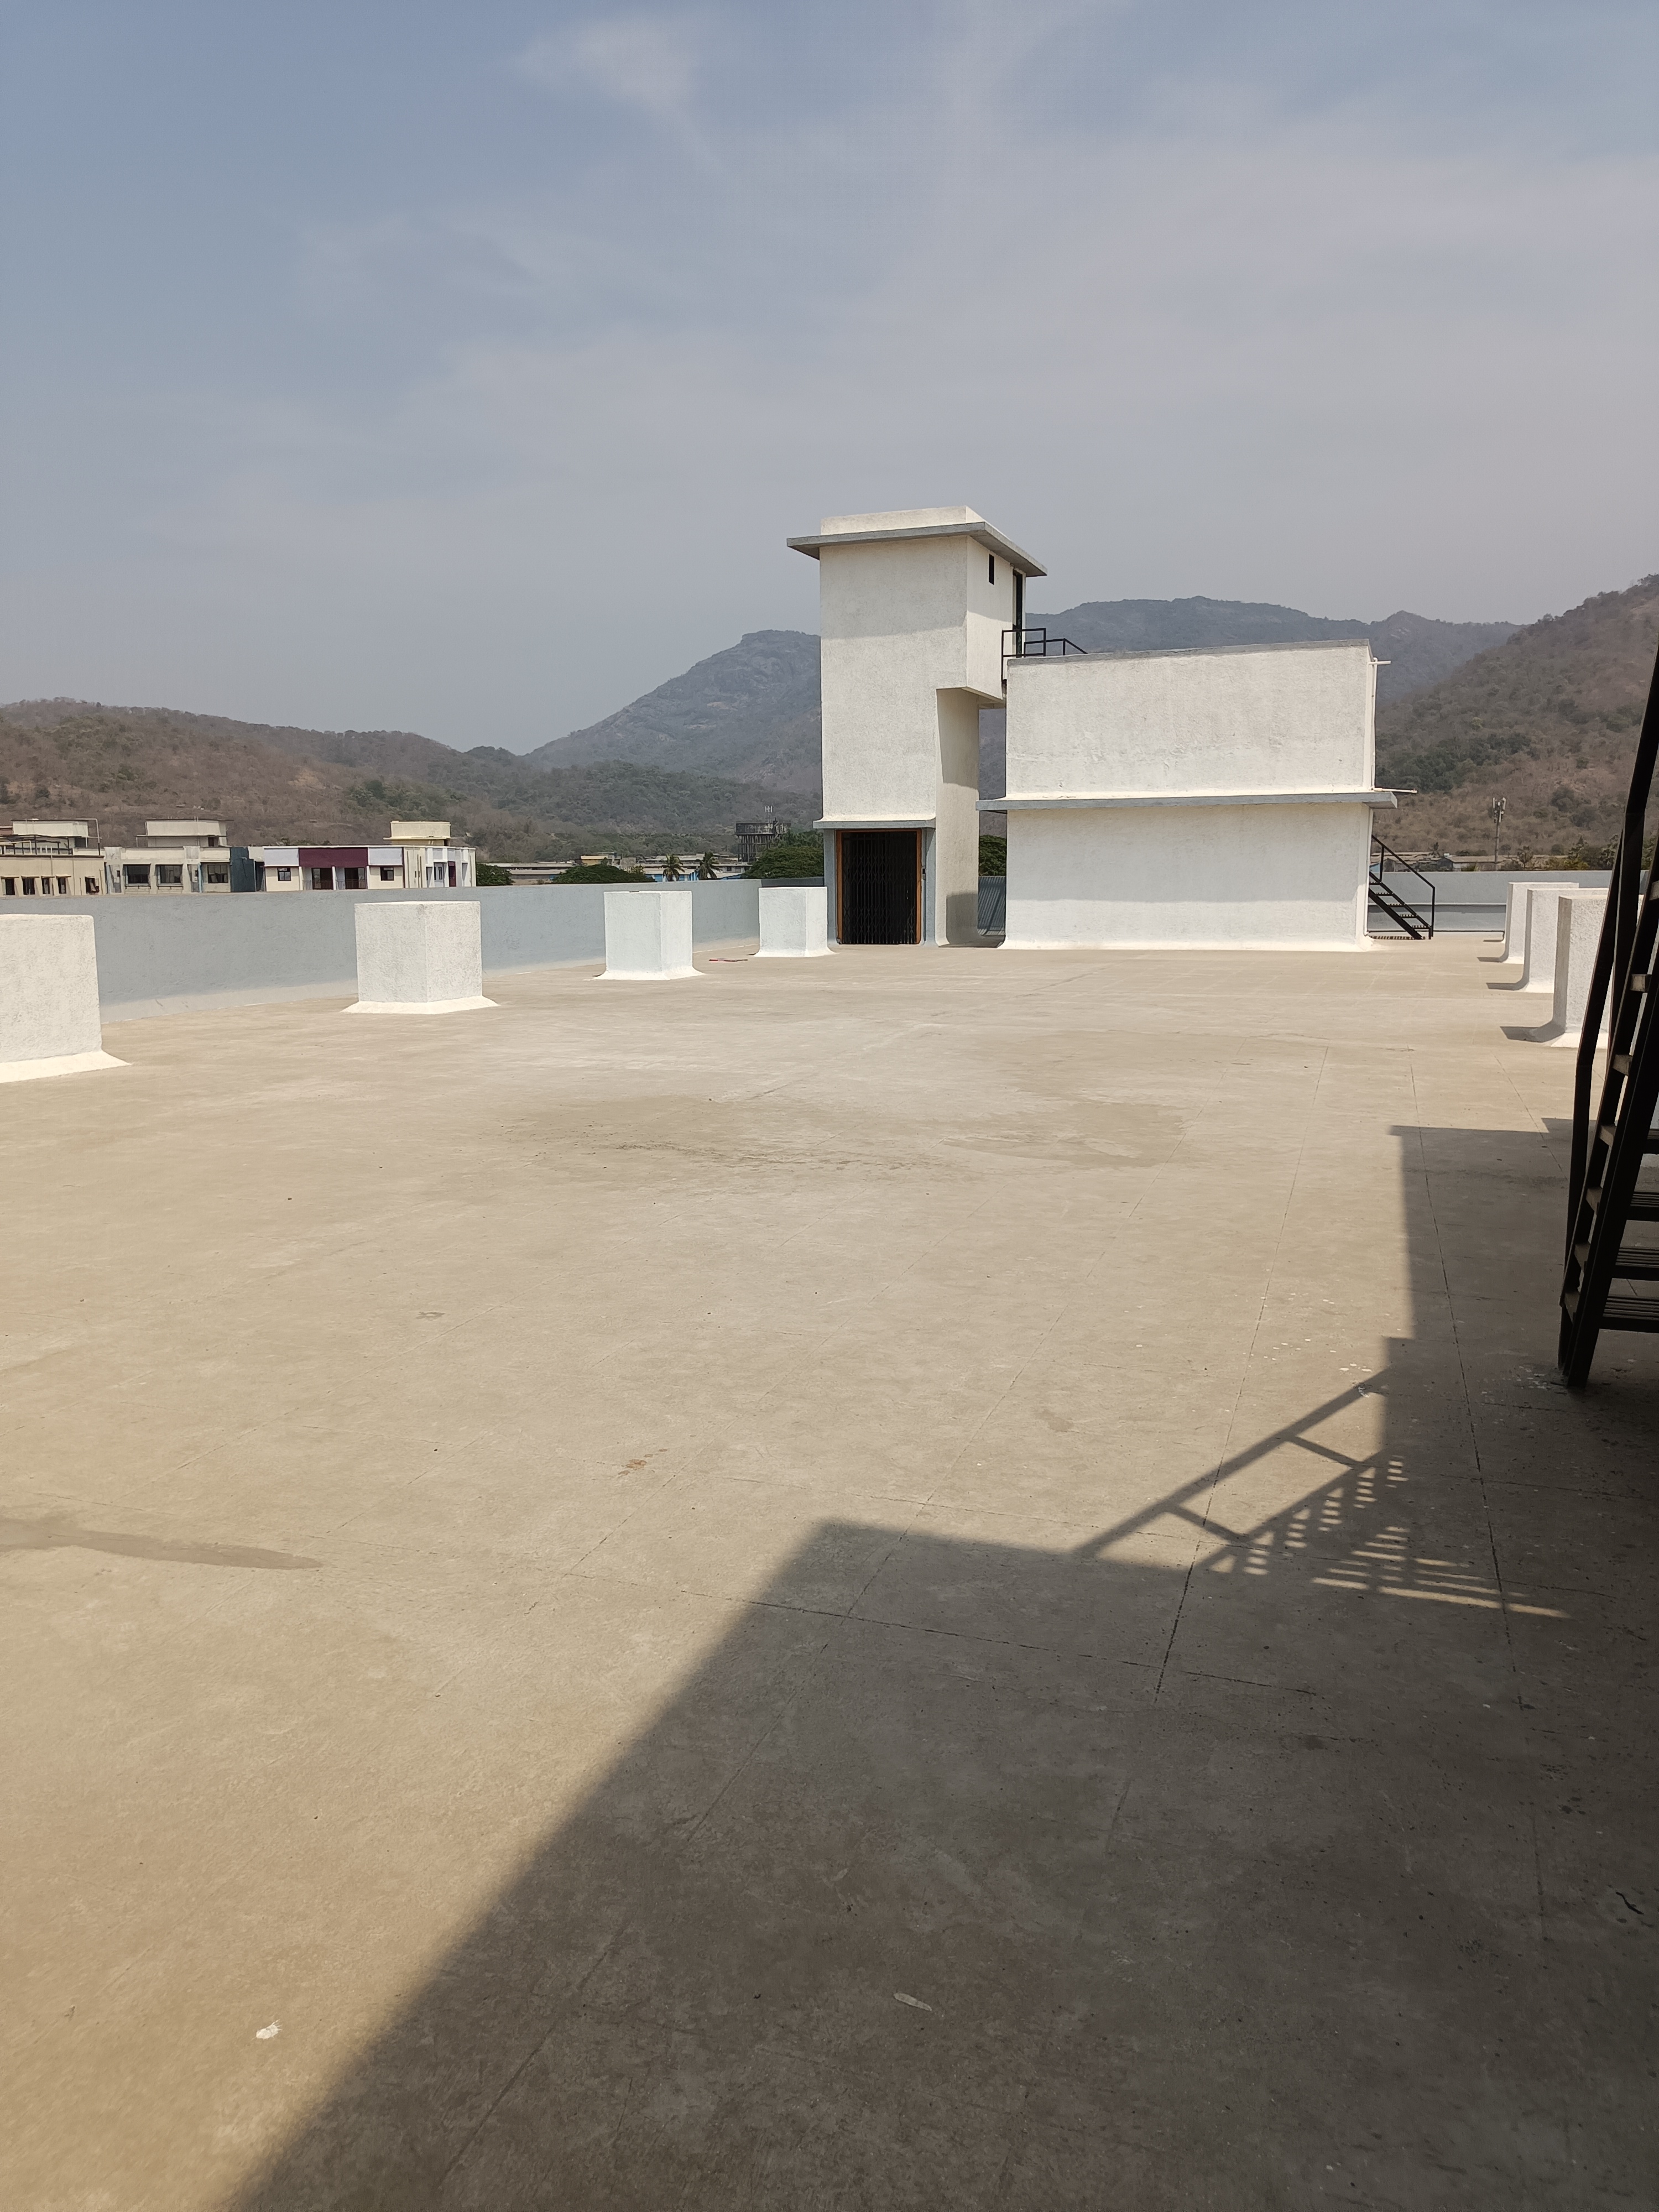 INDEPENDENT INDUSTRIAL BUILDING FOR SALE AT NALLASOPARA EAST